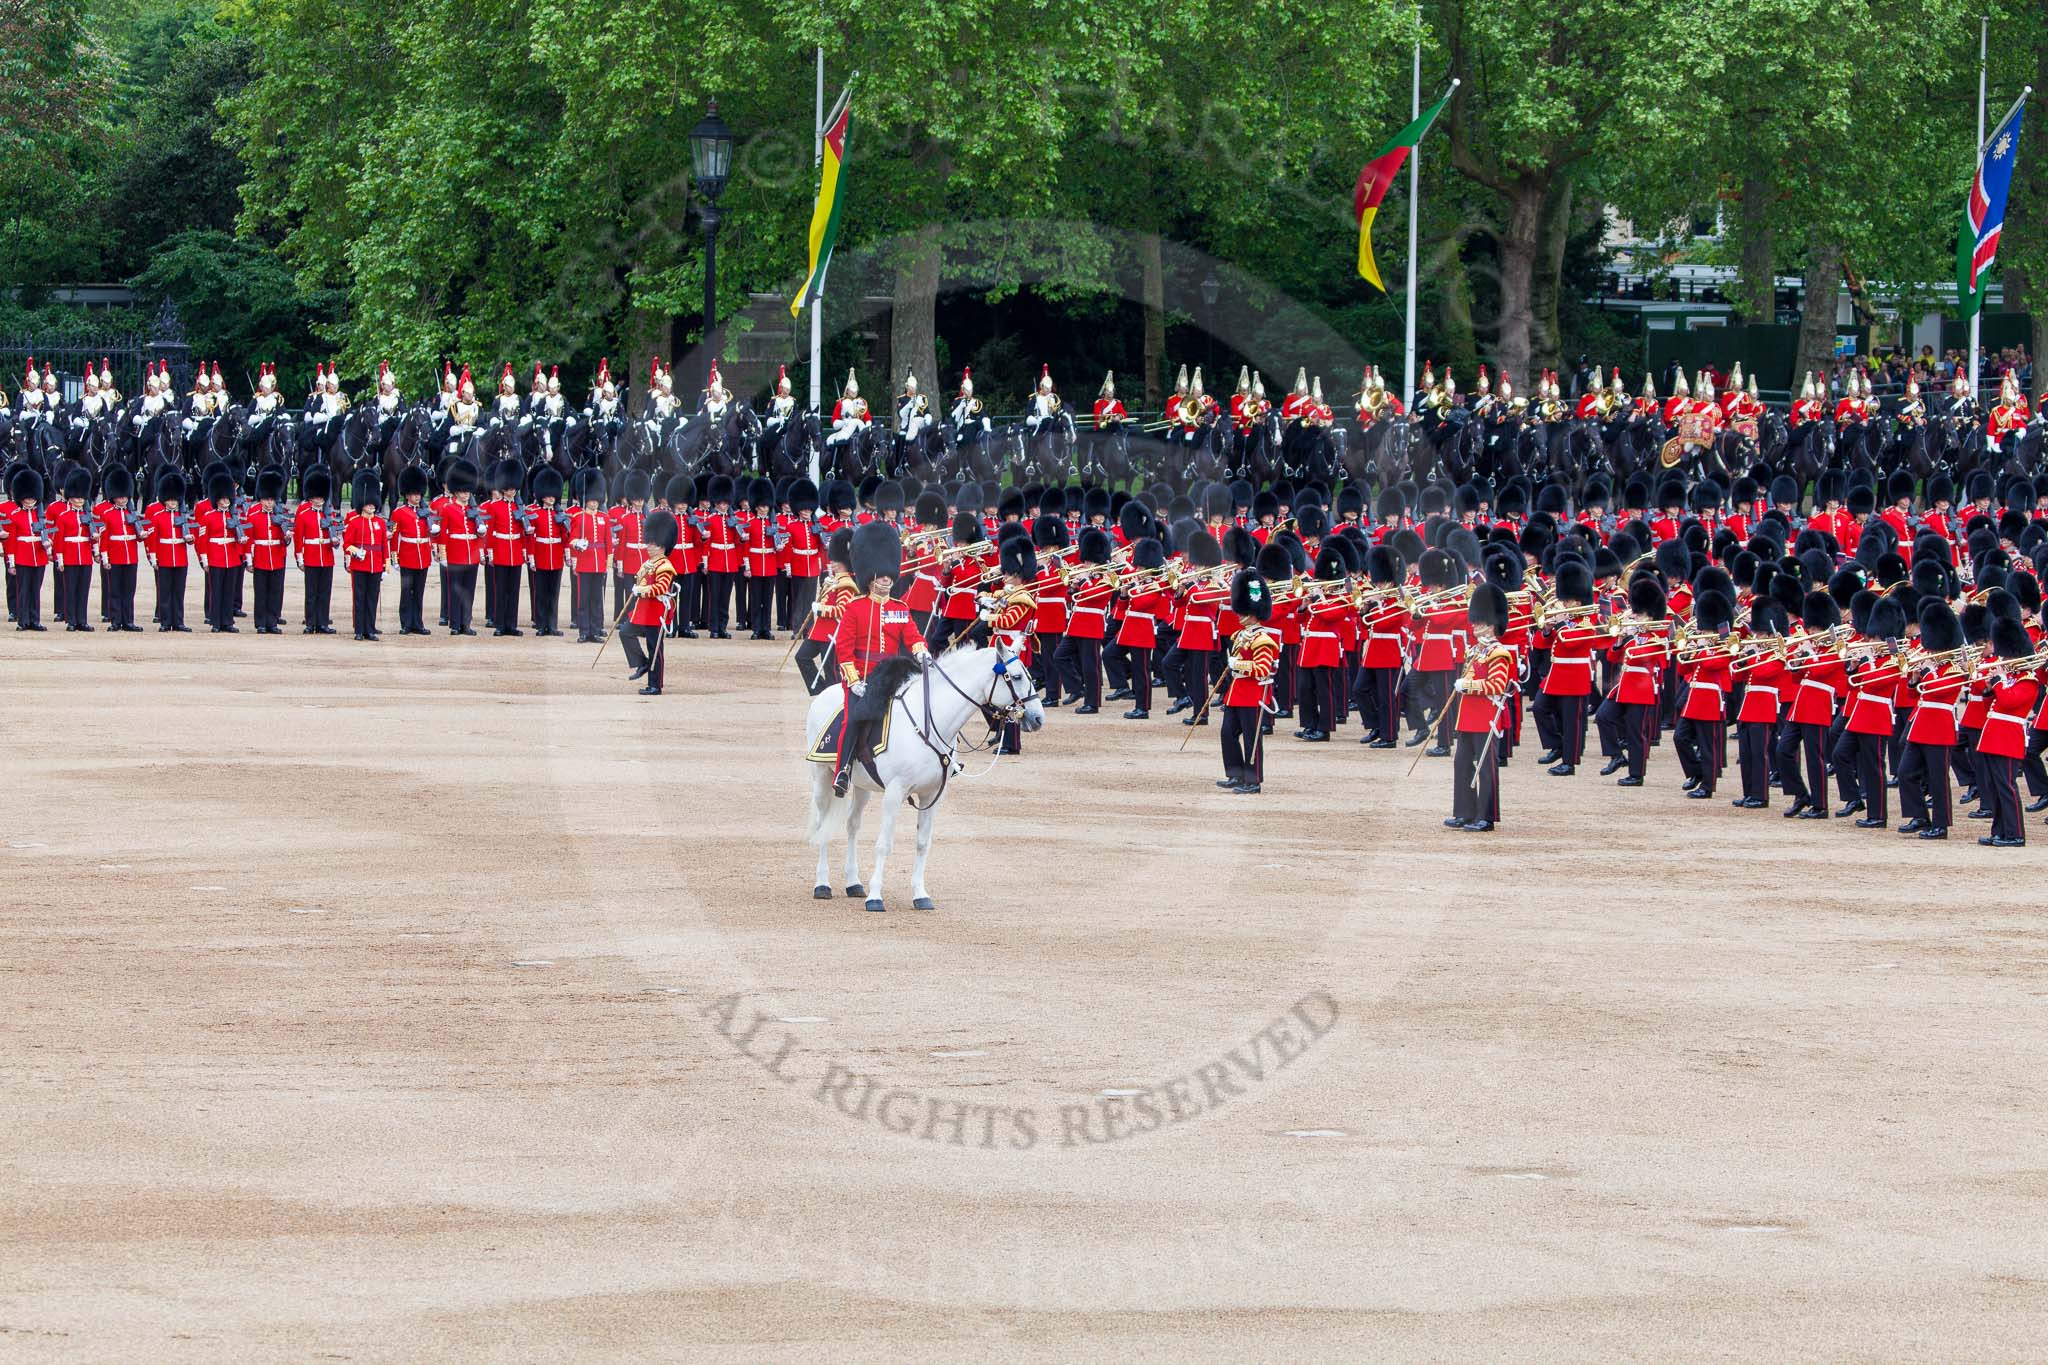 Major General's Review 2013: The Field Officer and the five Drum Majors after the Escort for the Colour has become the Escort to the Colour and the Massed Bands are performing the legendary spin wheel..
Horse Guards Parade, Westminster,
London SW1,

United Kingdom,
on 01 June 2013 at 11:21, image #413